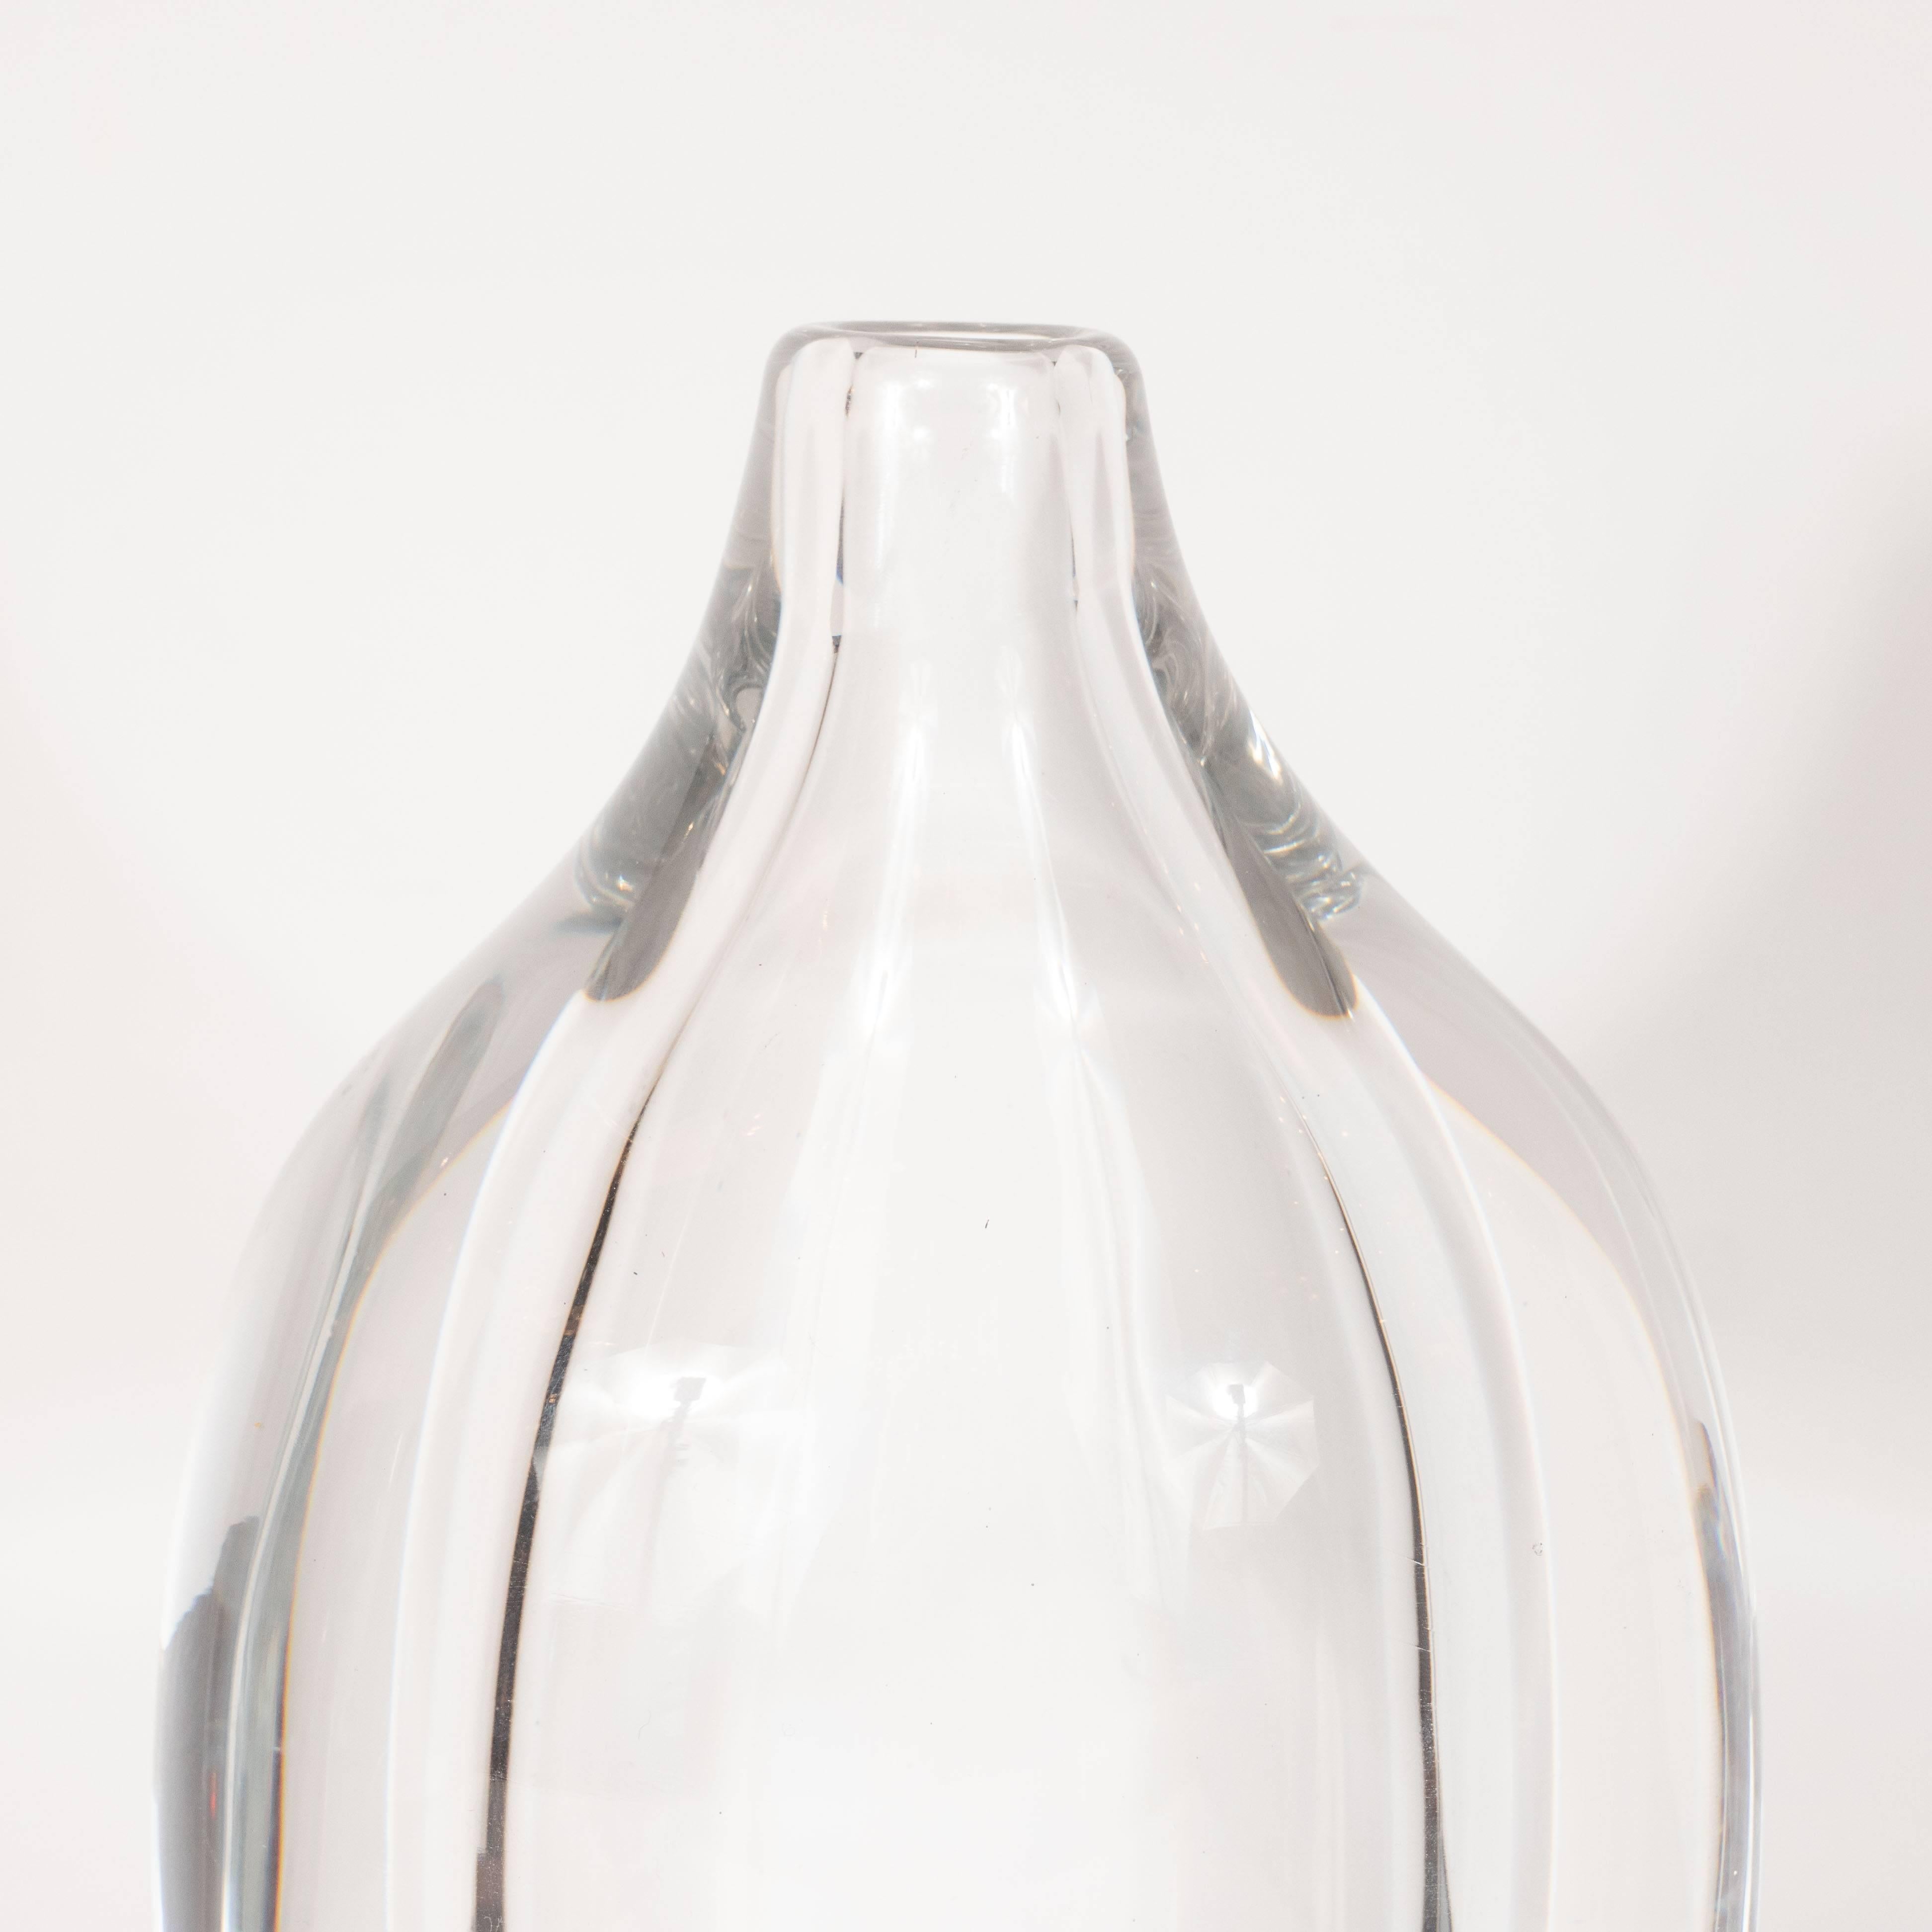 This elegant and sophisticated vase was realized by the esteemed midcentury Swedish glass studio, Orrefors, circa 1960. It features an ovoid form- with a concentric form of the same shape inlaid in the center- sloped shoulders and a narrow circular